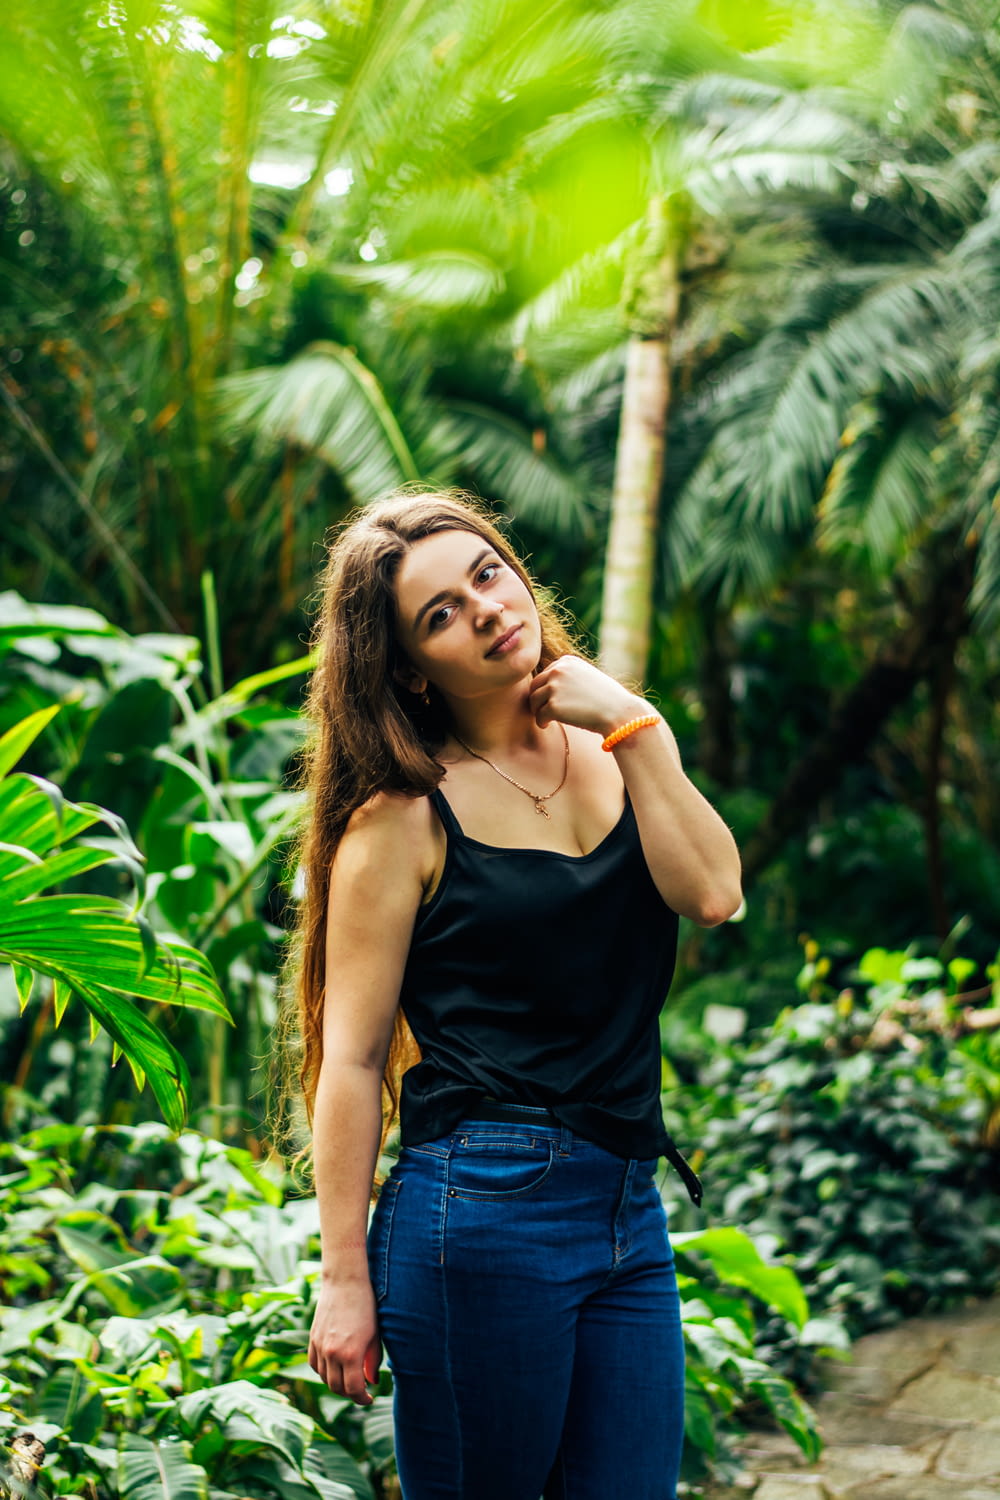 woman in black tank top and blue denim shorts standing near green plants during daytime